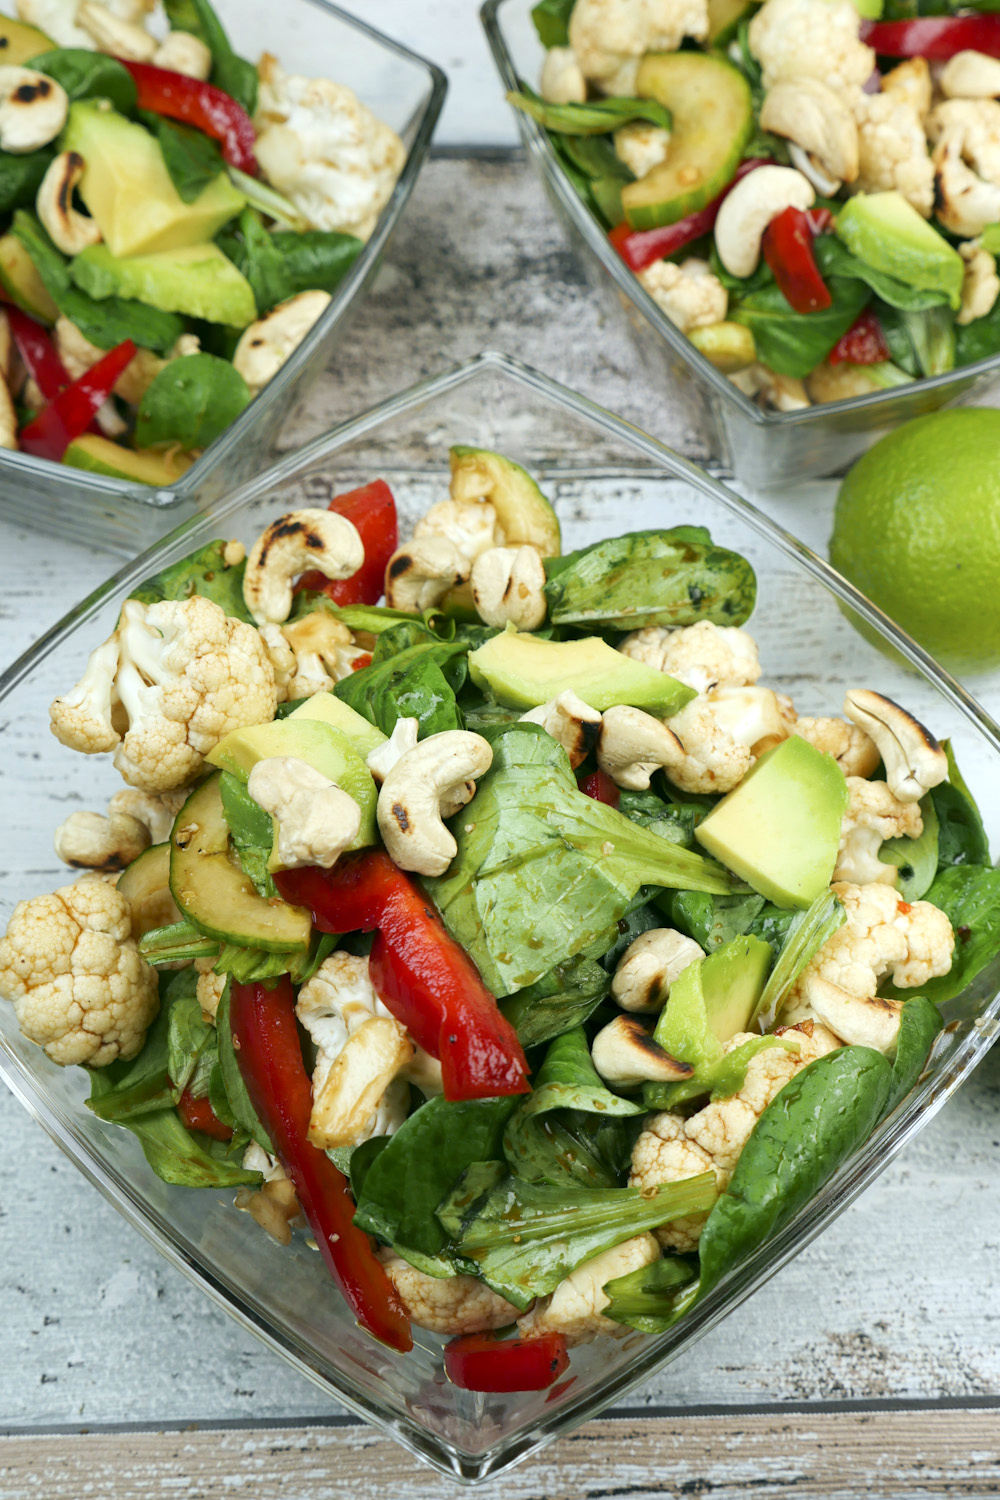 Quick Low Carb Chickpea Salad With Avocado And Tomatoes